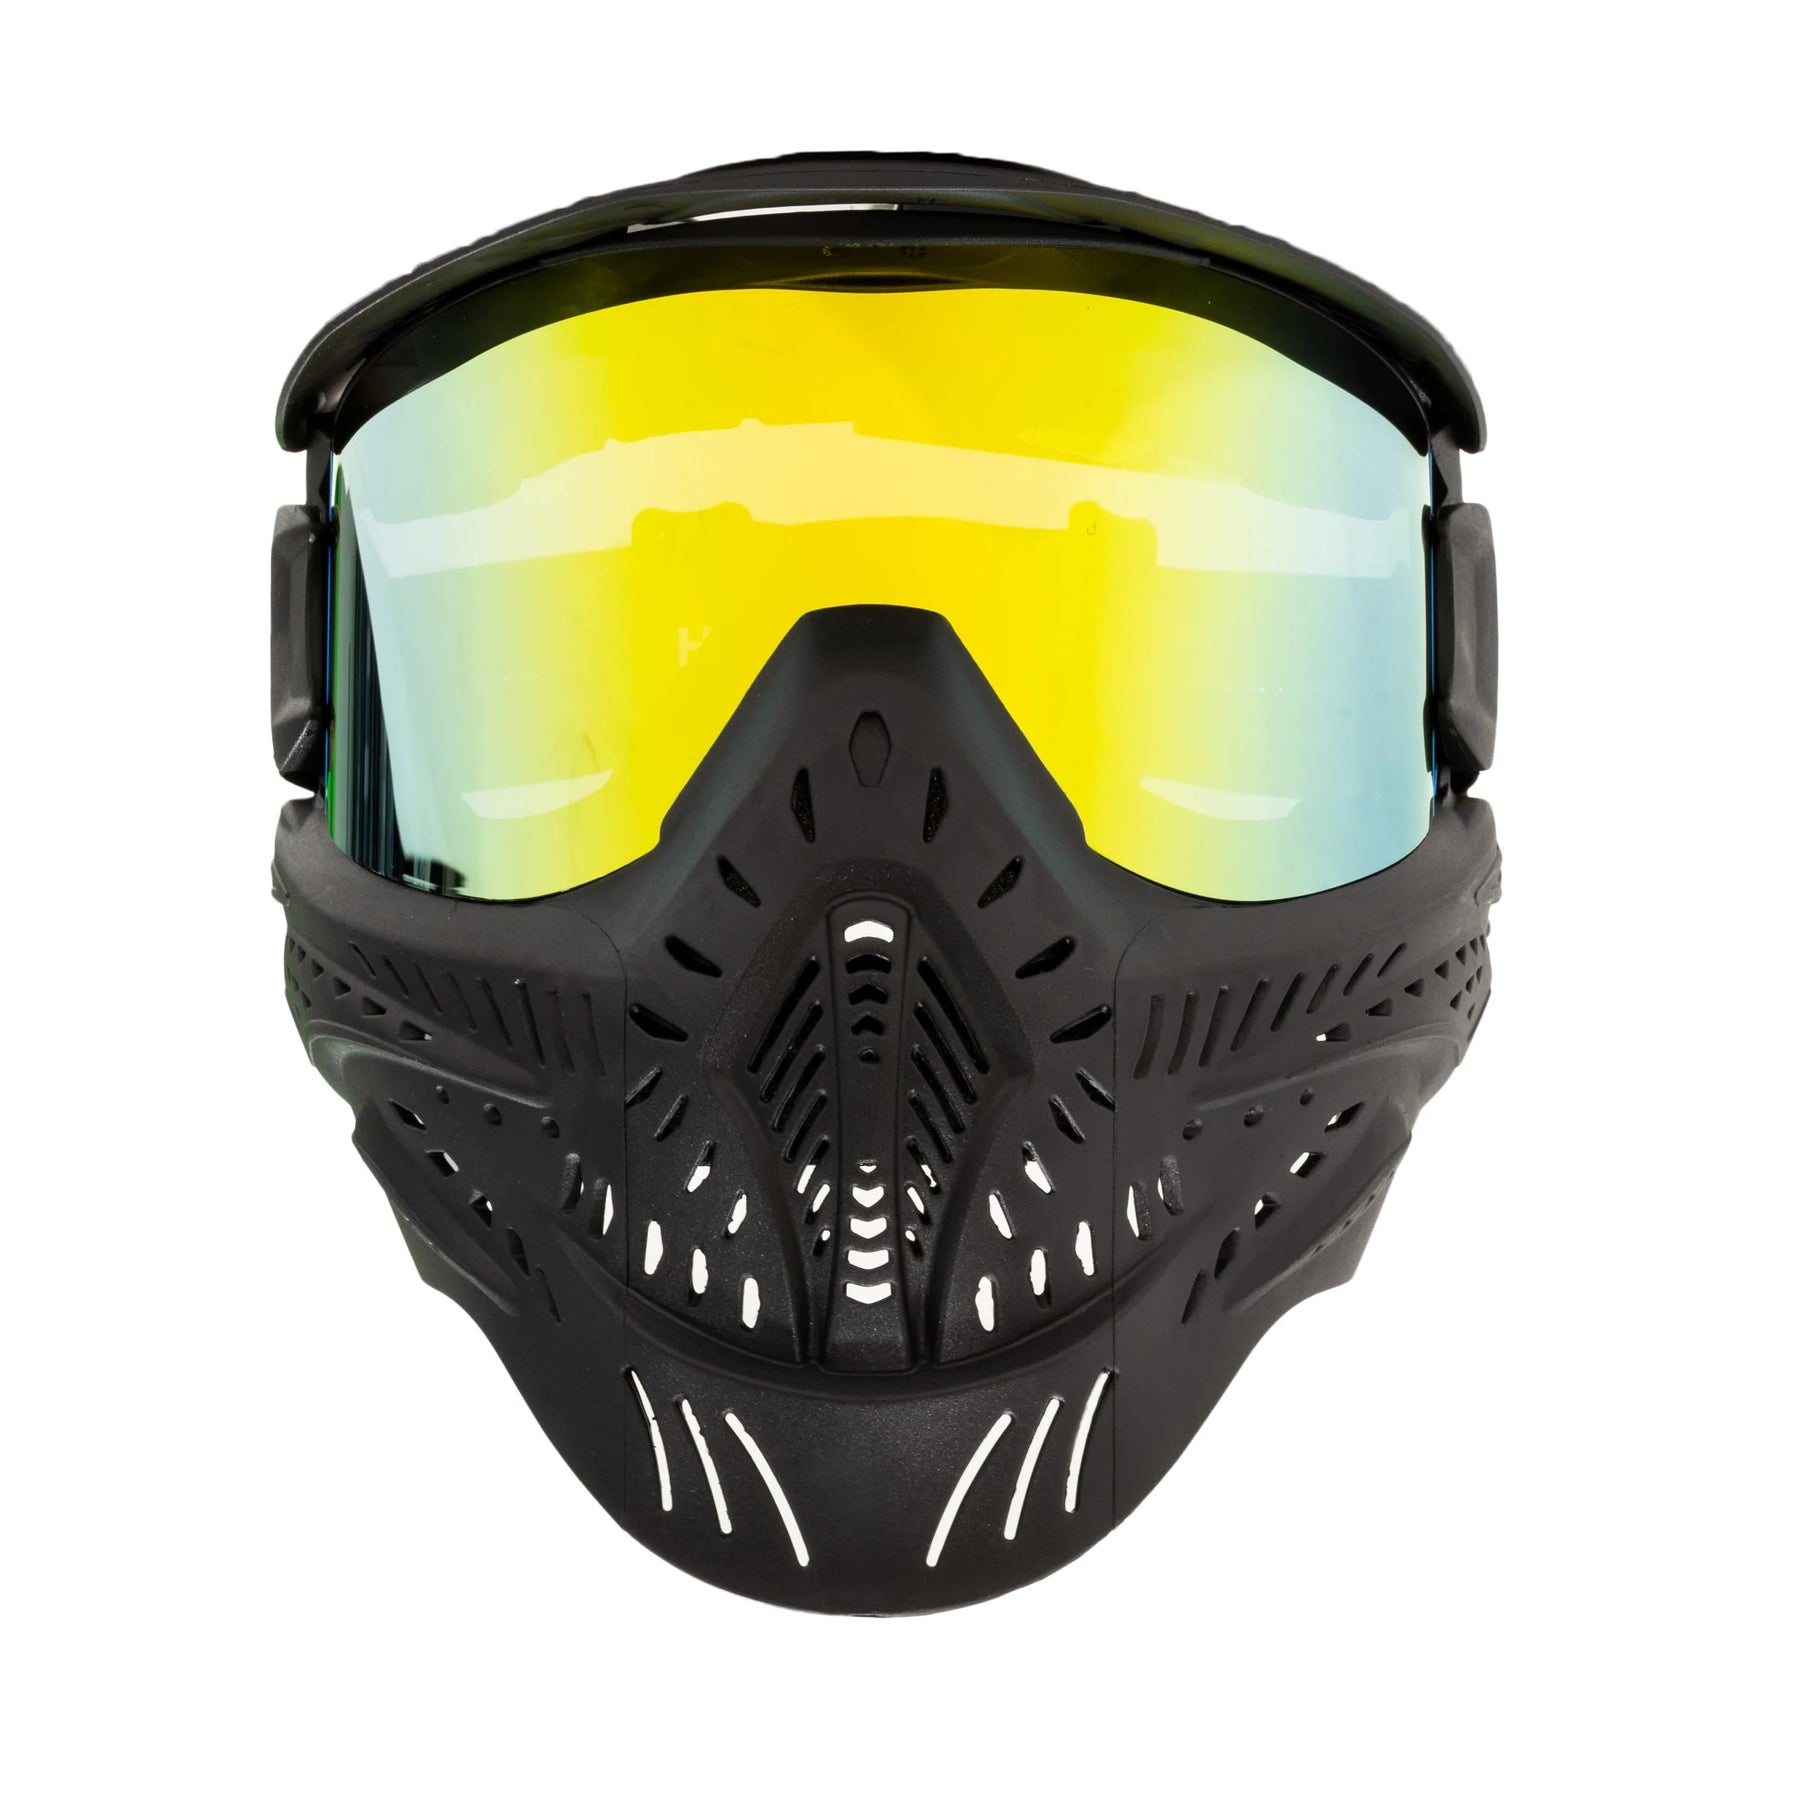 HSTL Goggle | Color: Black W/ Gold Thermal Lens | Paintball & Airsoft Goggle